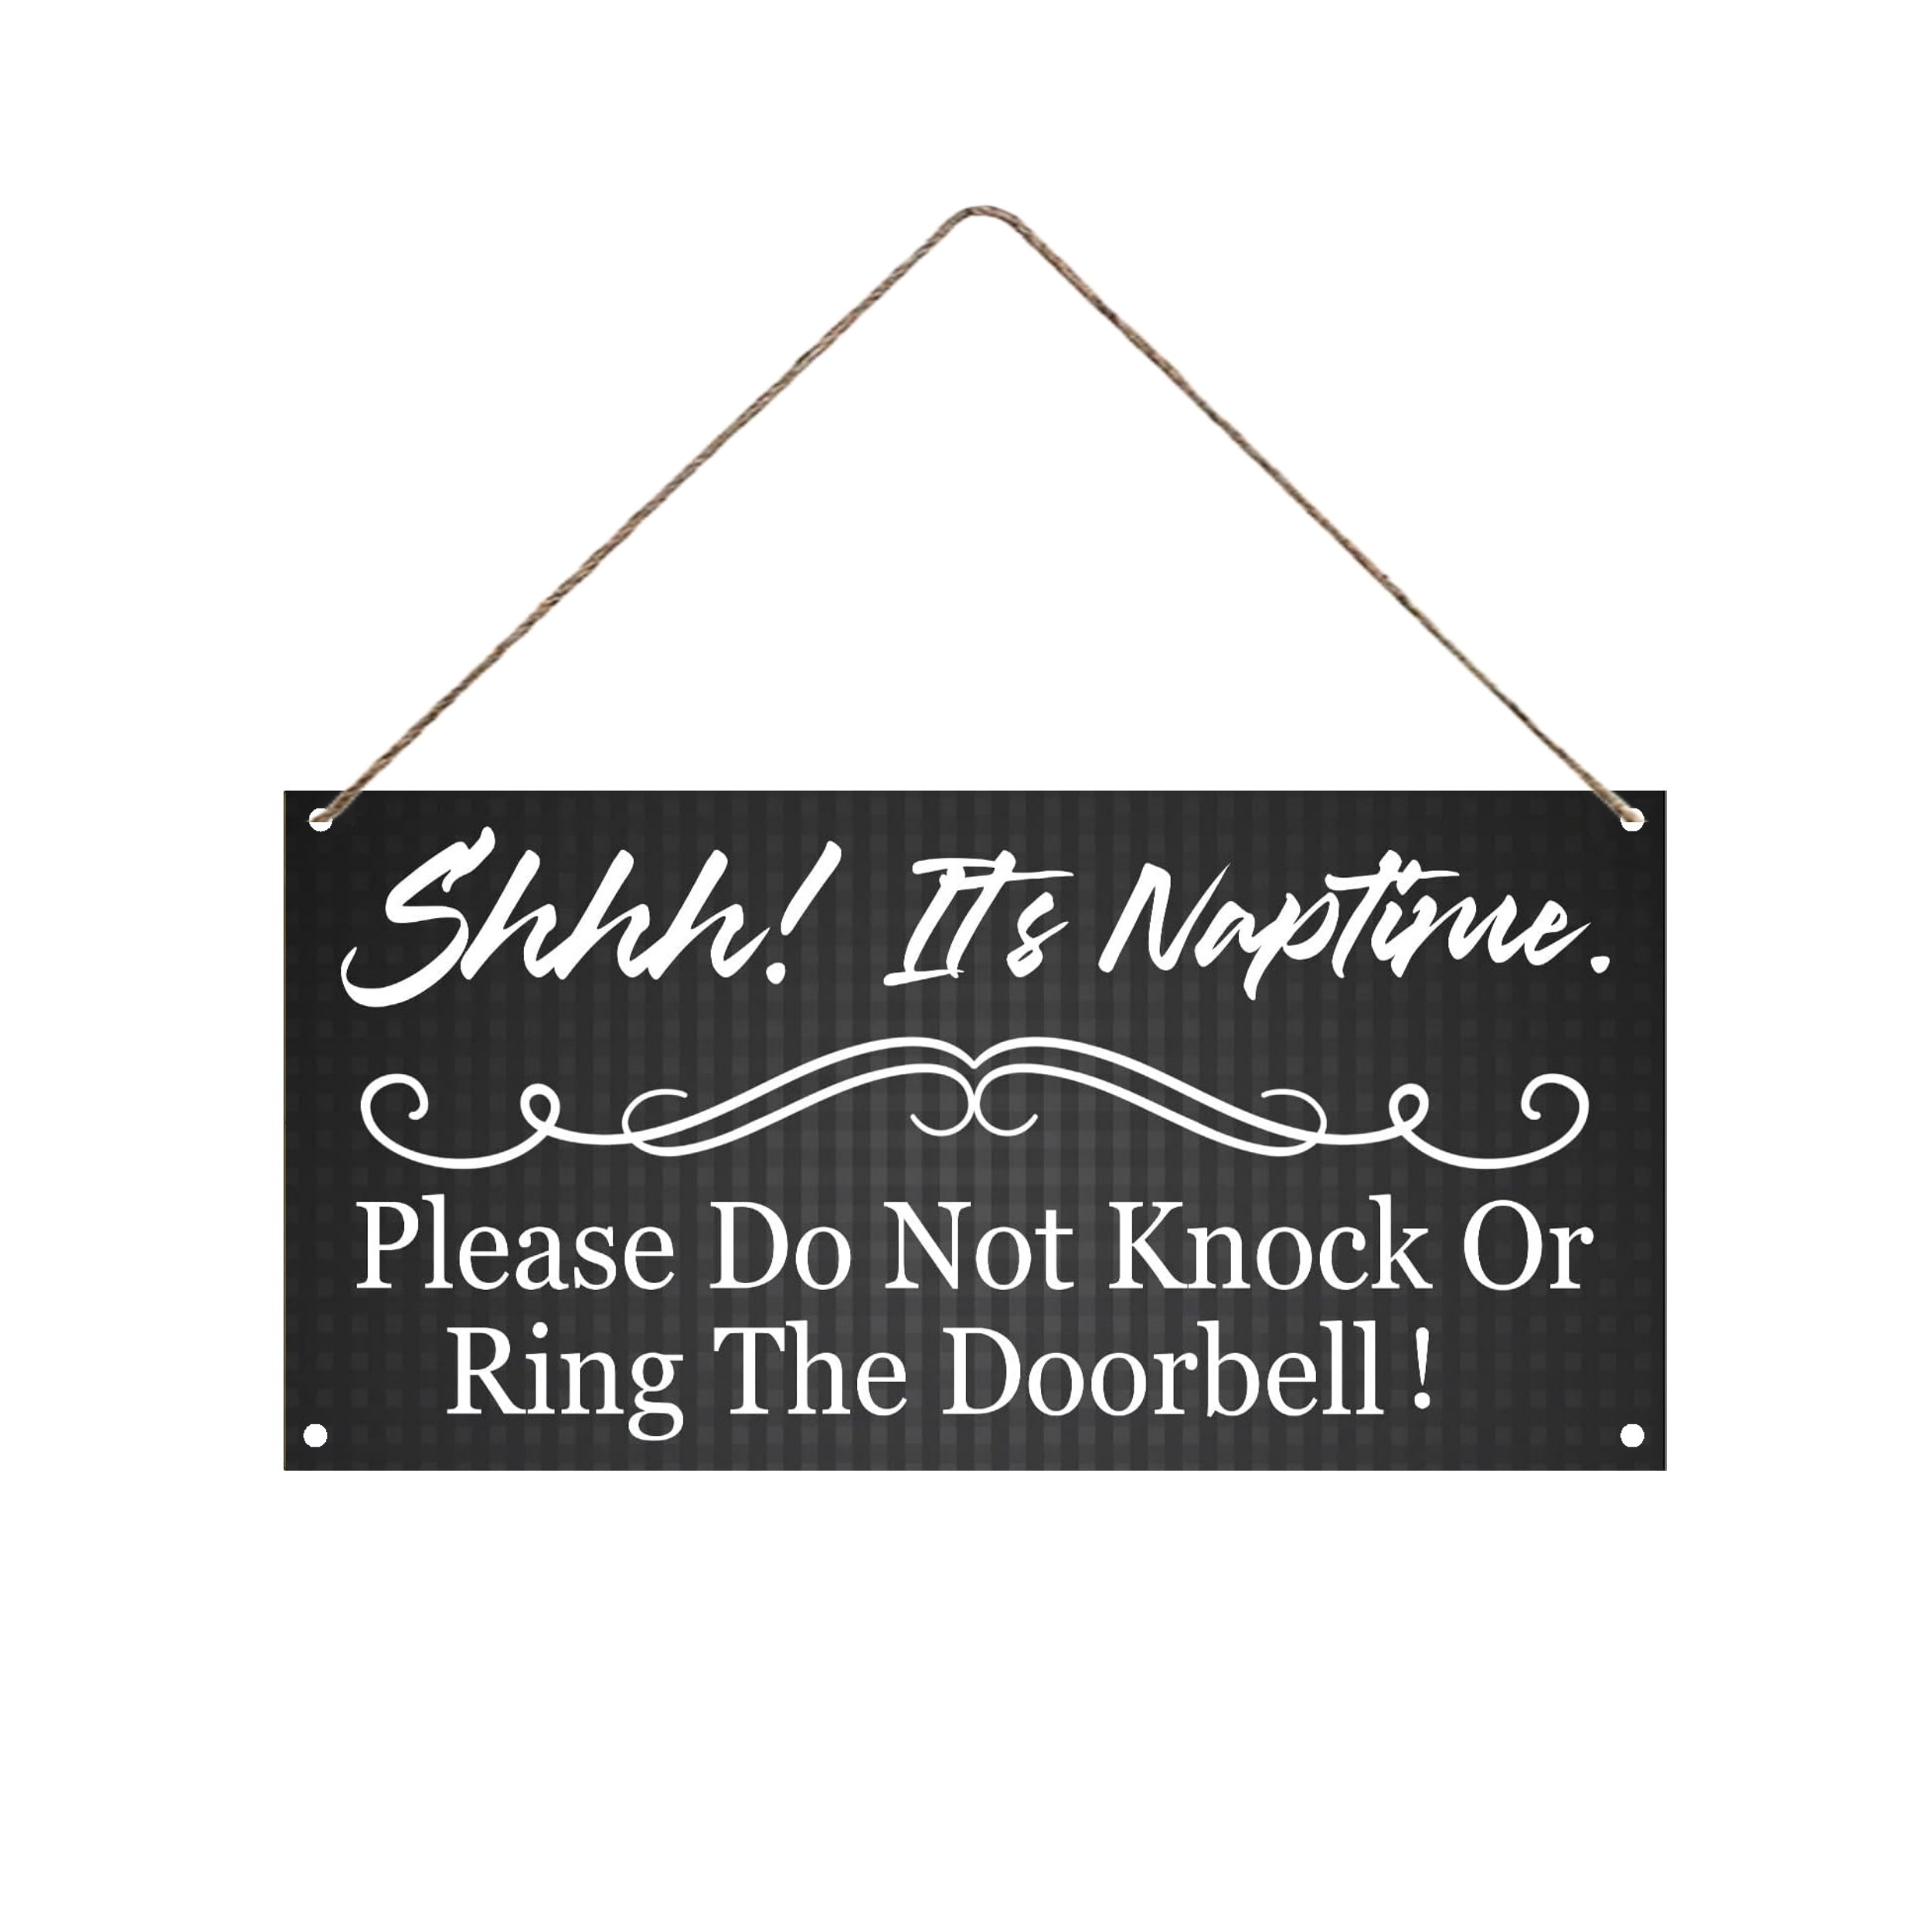 1pc Working From Home Sign Do Not Knock Or Ring Doorbell - Temu